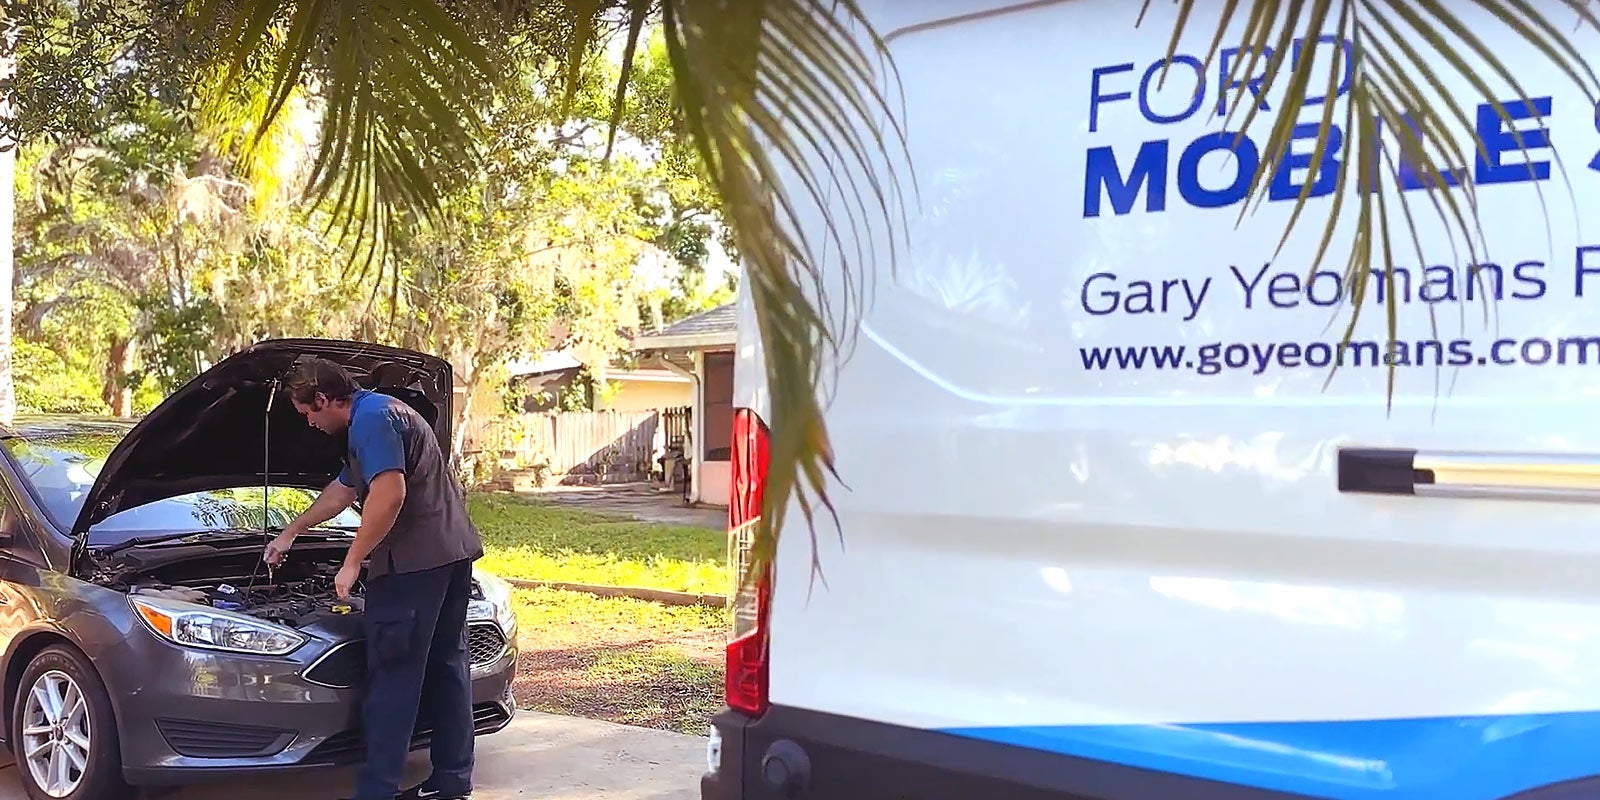 Ford Mobile Service | Gary Yeomans Ford in Daytona Beach FL